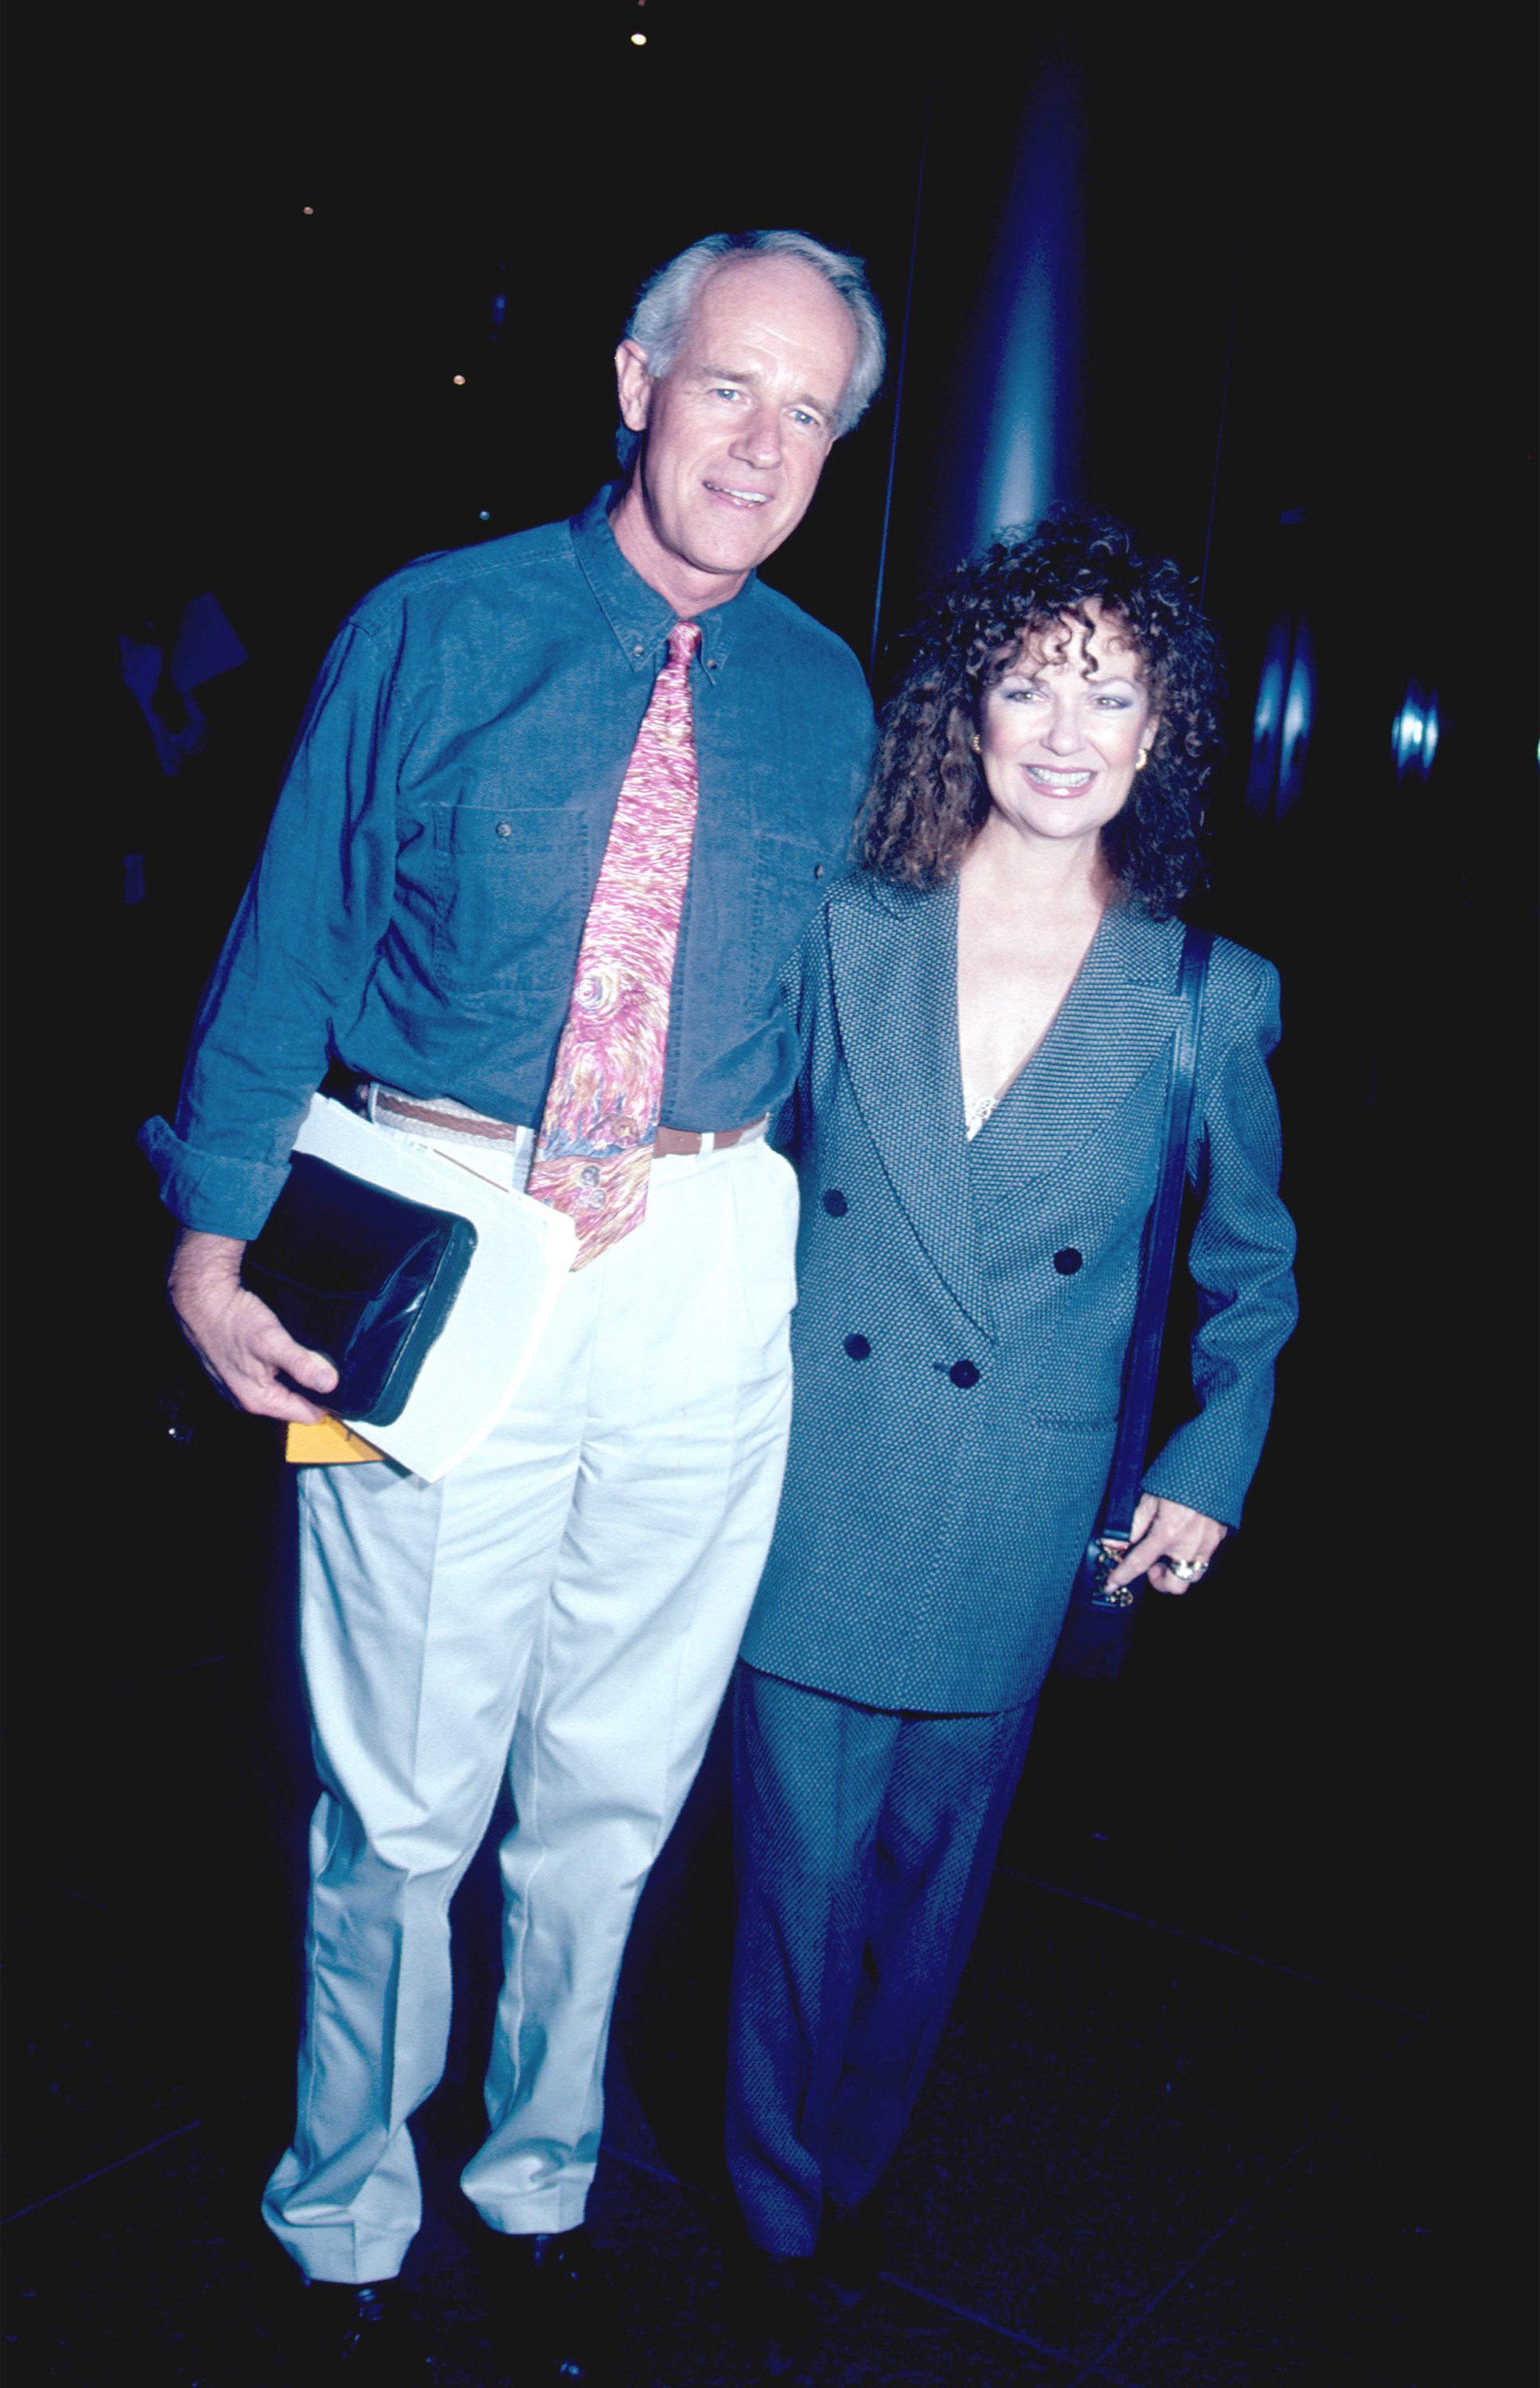 Mike Farrell and Shelley Fabares attend the screening of "Bopha," on September 21, 1993 in Los Angeles, California. / Source: Getty Images